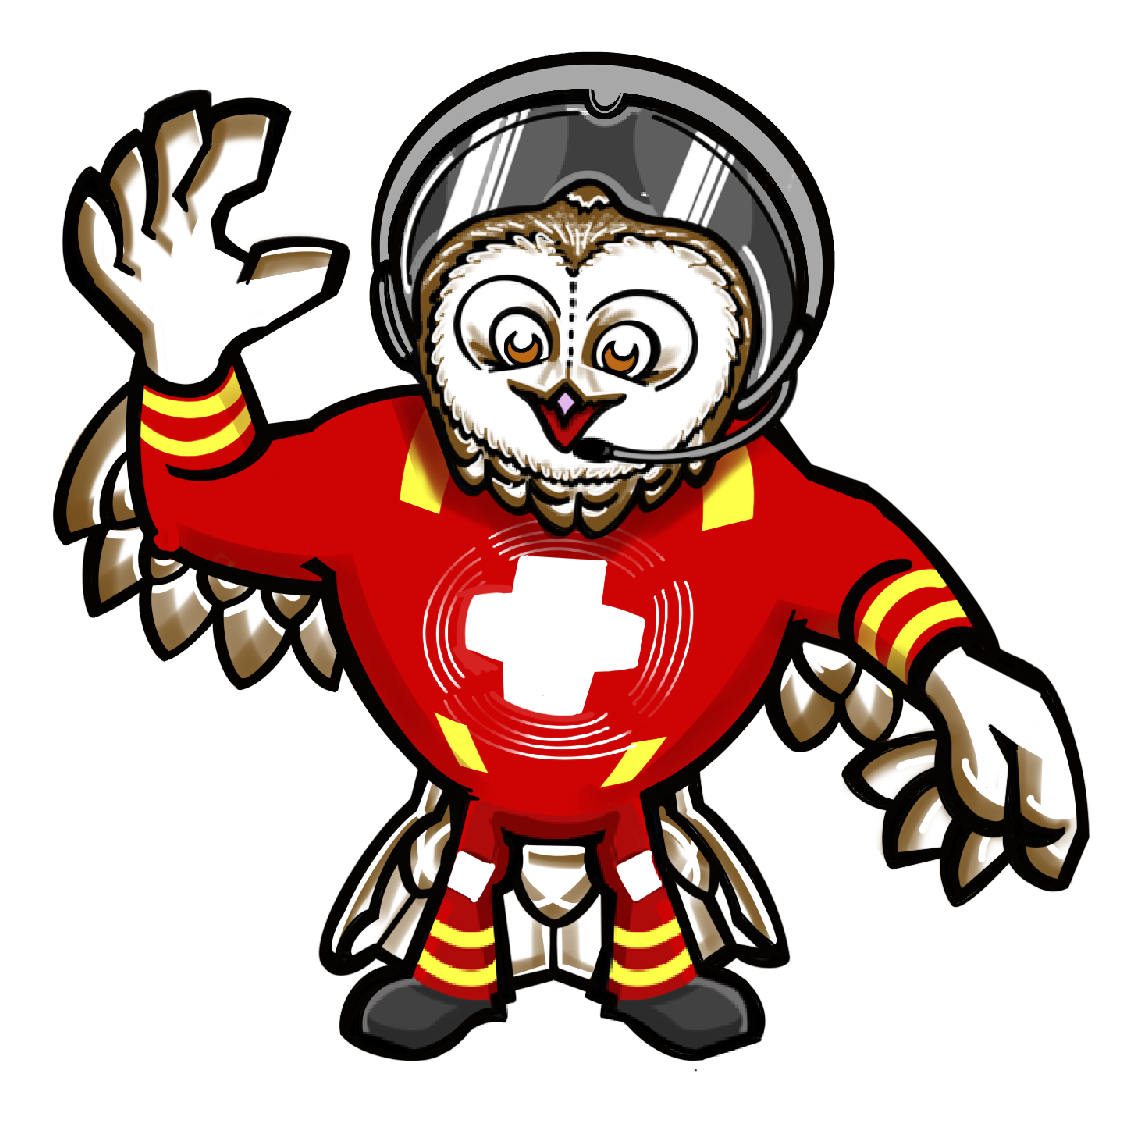 A white owl who's a doctor. They wear a red and yellow uniform with a white cross on the front.